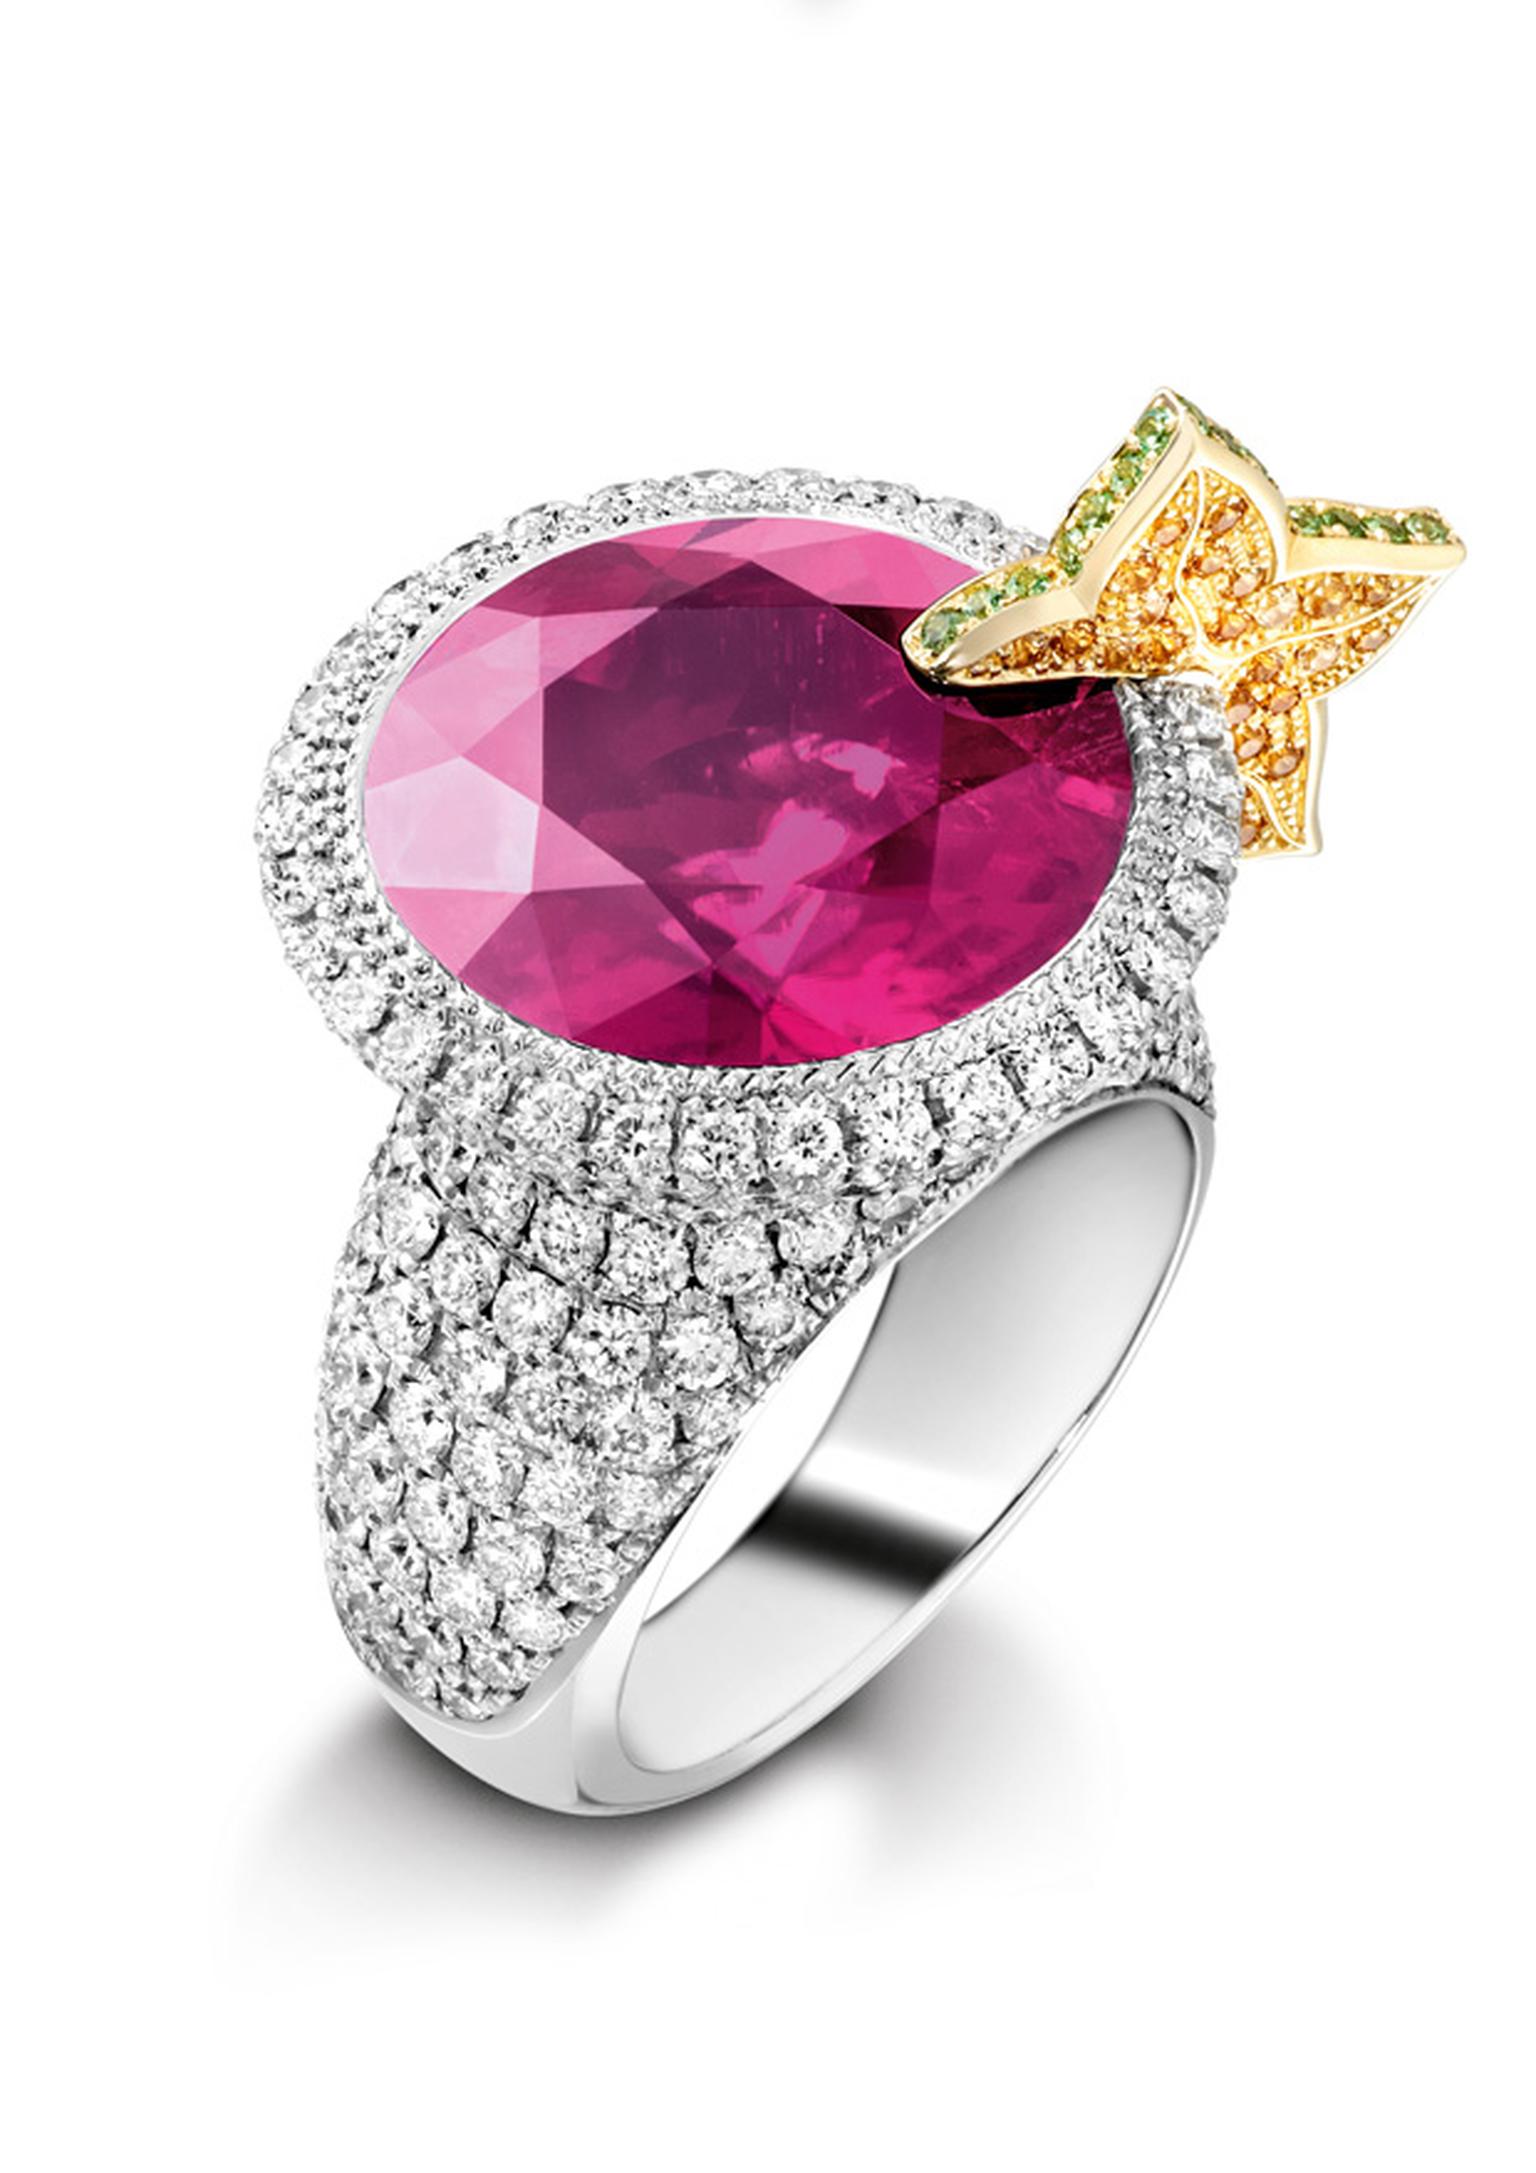 Piaget Cosmopolitan cocktail ring with rubelite, diamonds and citrine